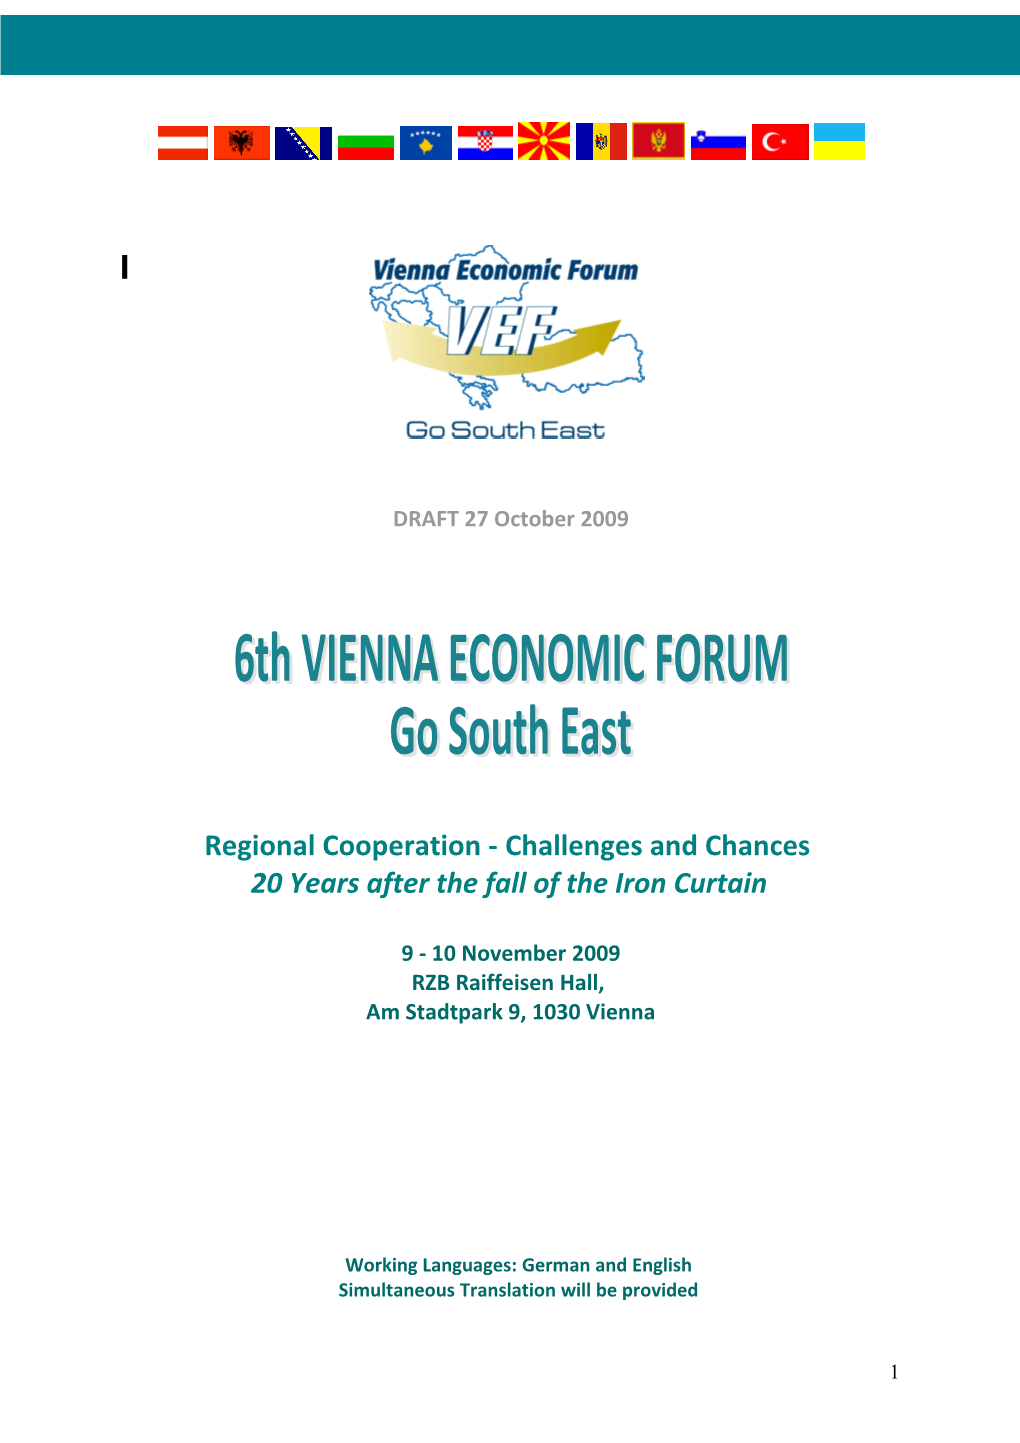 Regional Cooperation - Challenges and Chances